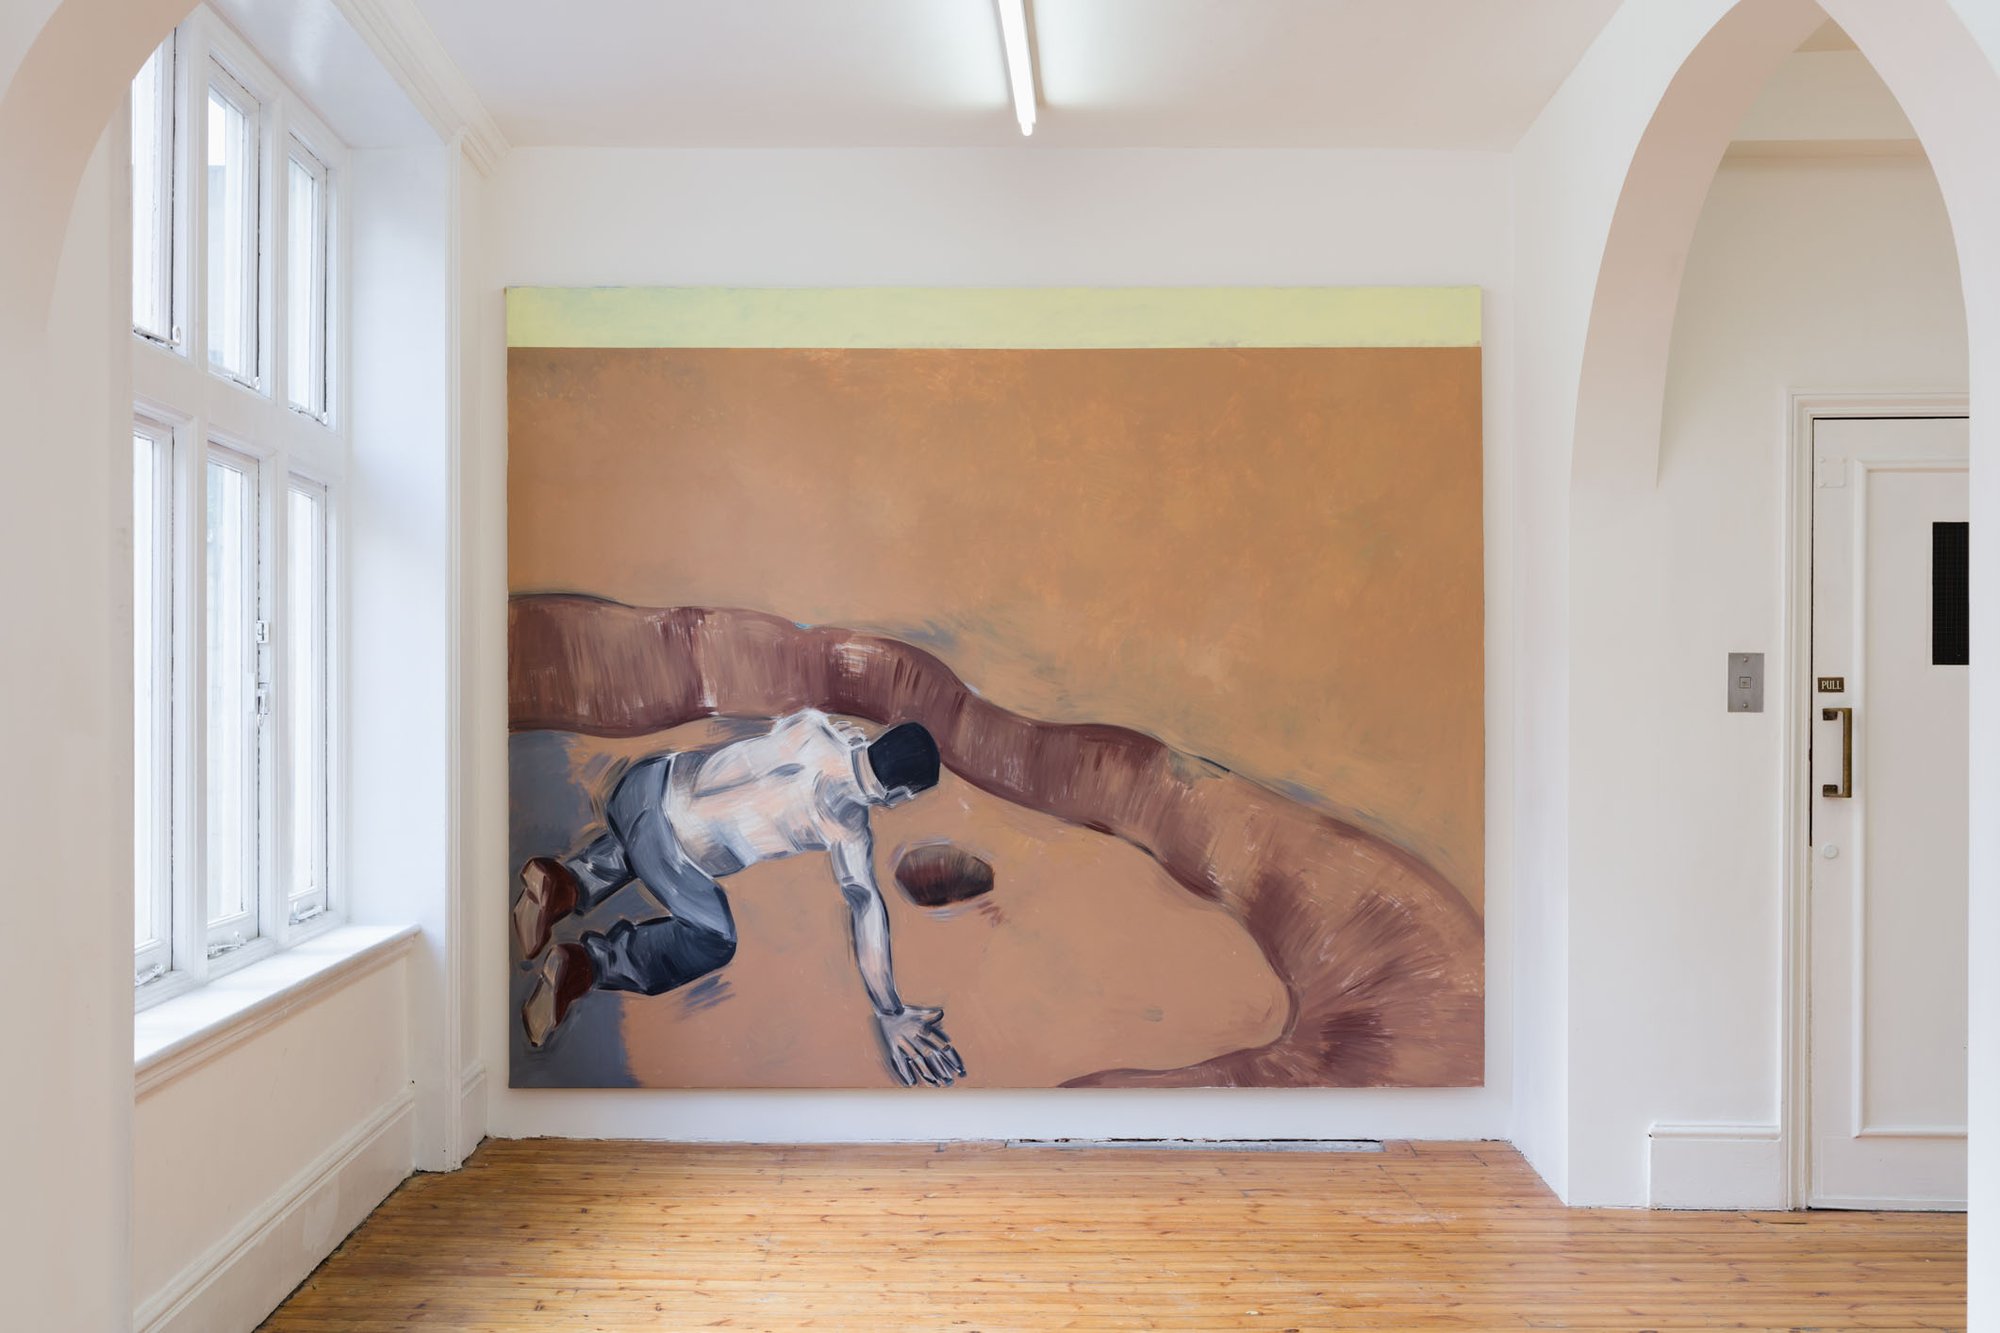 Apostolos Georgiou, Untitled, acrylic on canvas, 230 x 280 cm (90 1/2 x 110 1/4 in), 2016. Installation View, The Same Old Fucking Story, Rodeo, London, 2016